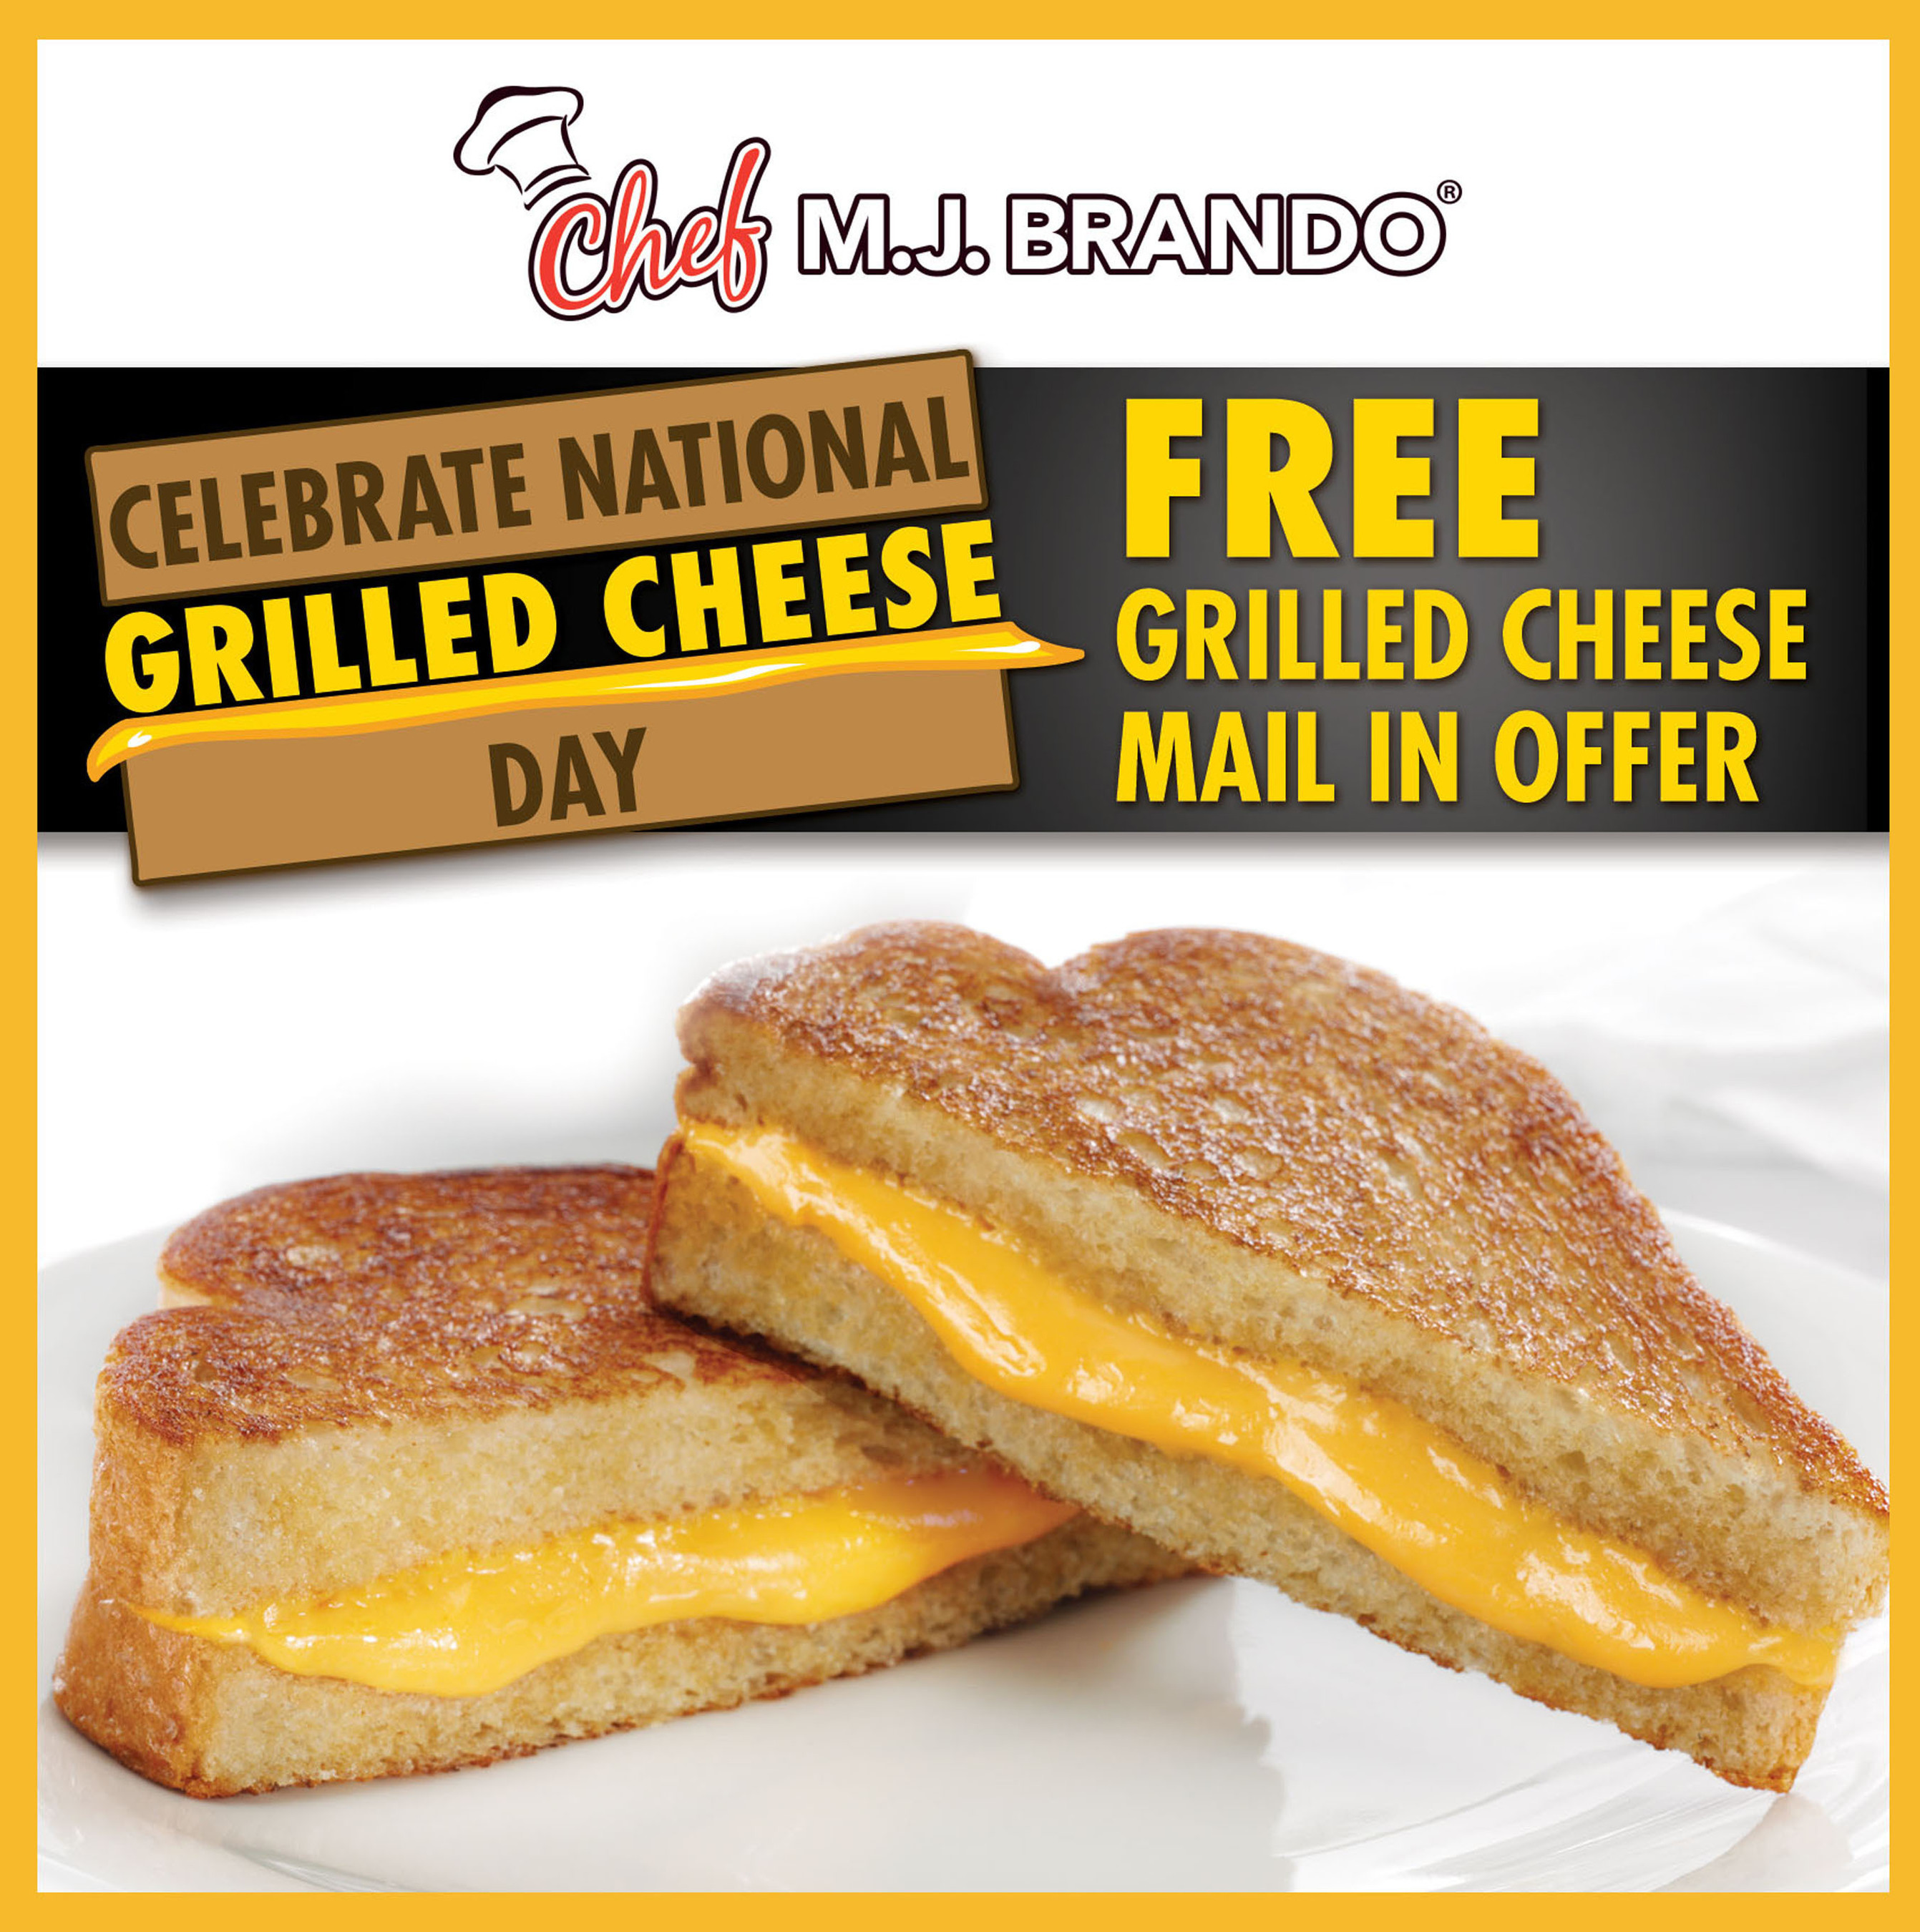 In celebration of National Grilled Cheese Day, Chef MJ Brando is offering consumers FREE grilled cheese sandwiches! Kicking off April 12th - April 30th, consumers simply log onto www.facebook.com/ChefMJBrando to view the steps required to redeem this special rebate. (PRNewsFoto/Chef MJ Brando) (PRNewsFoto/CHEF MJ BRANDO)